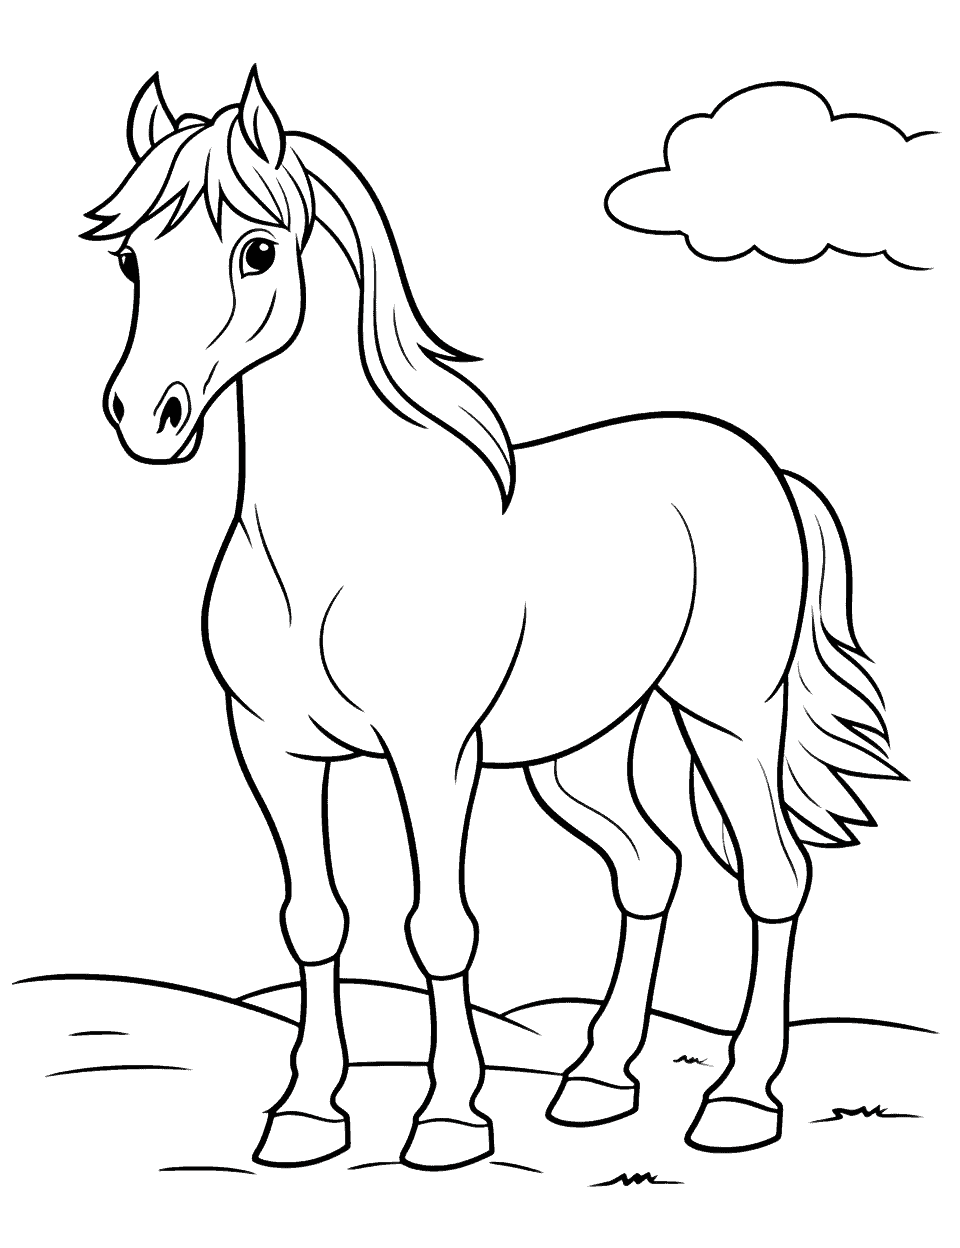 Simple Horse Drawing for Kids Coloring Page - An easy horse drawing, perfect for children interested in learning to draw horses.